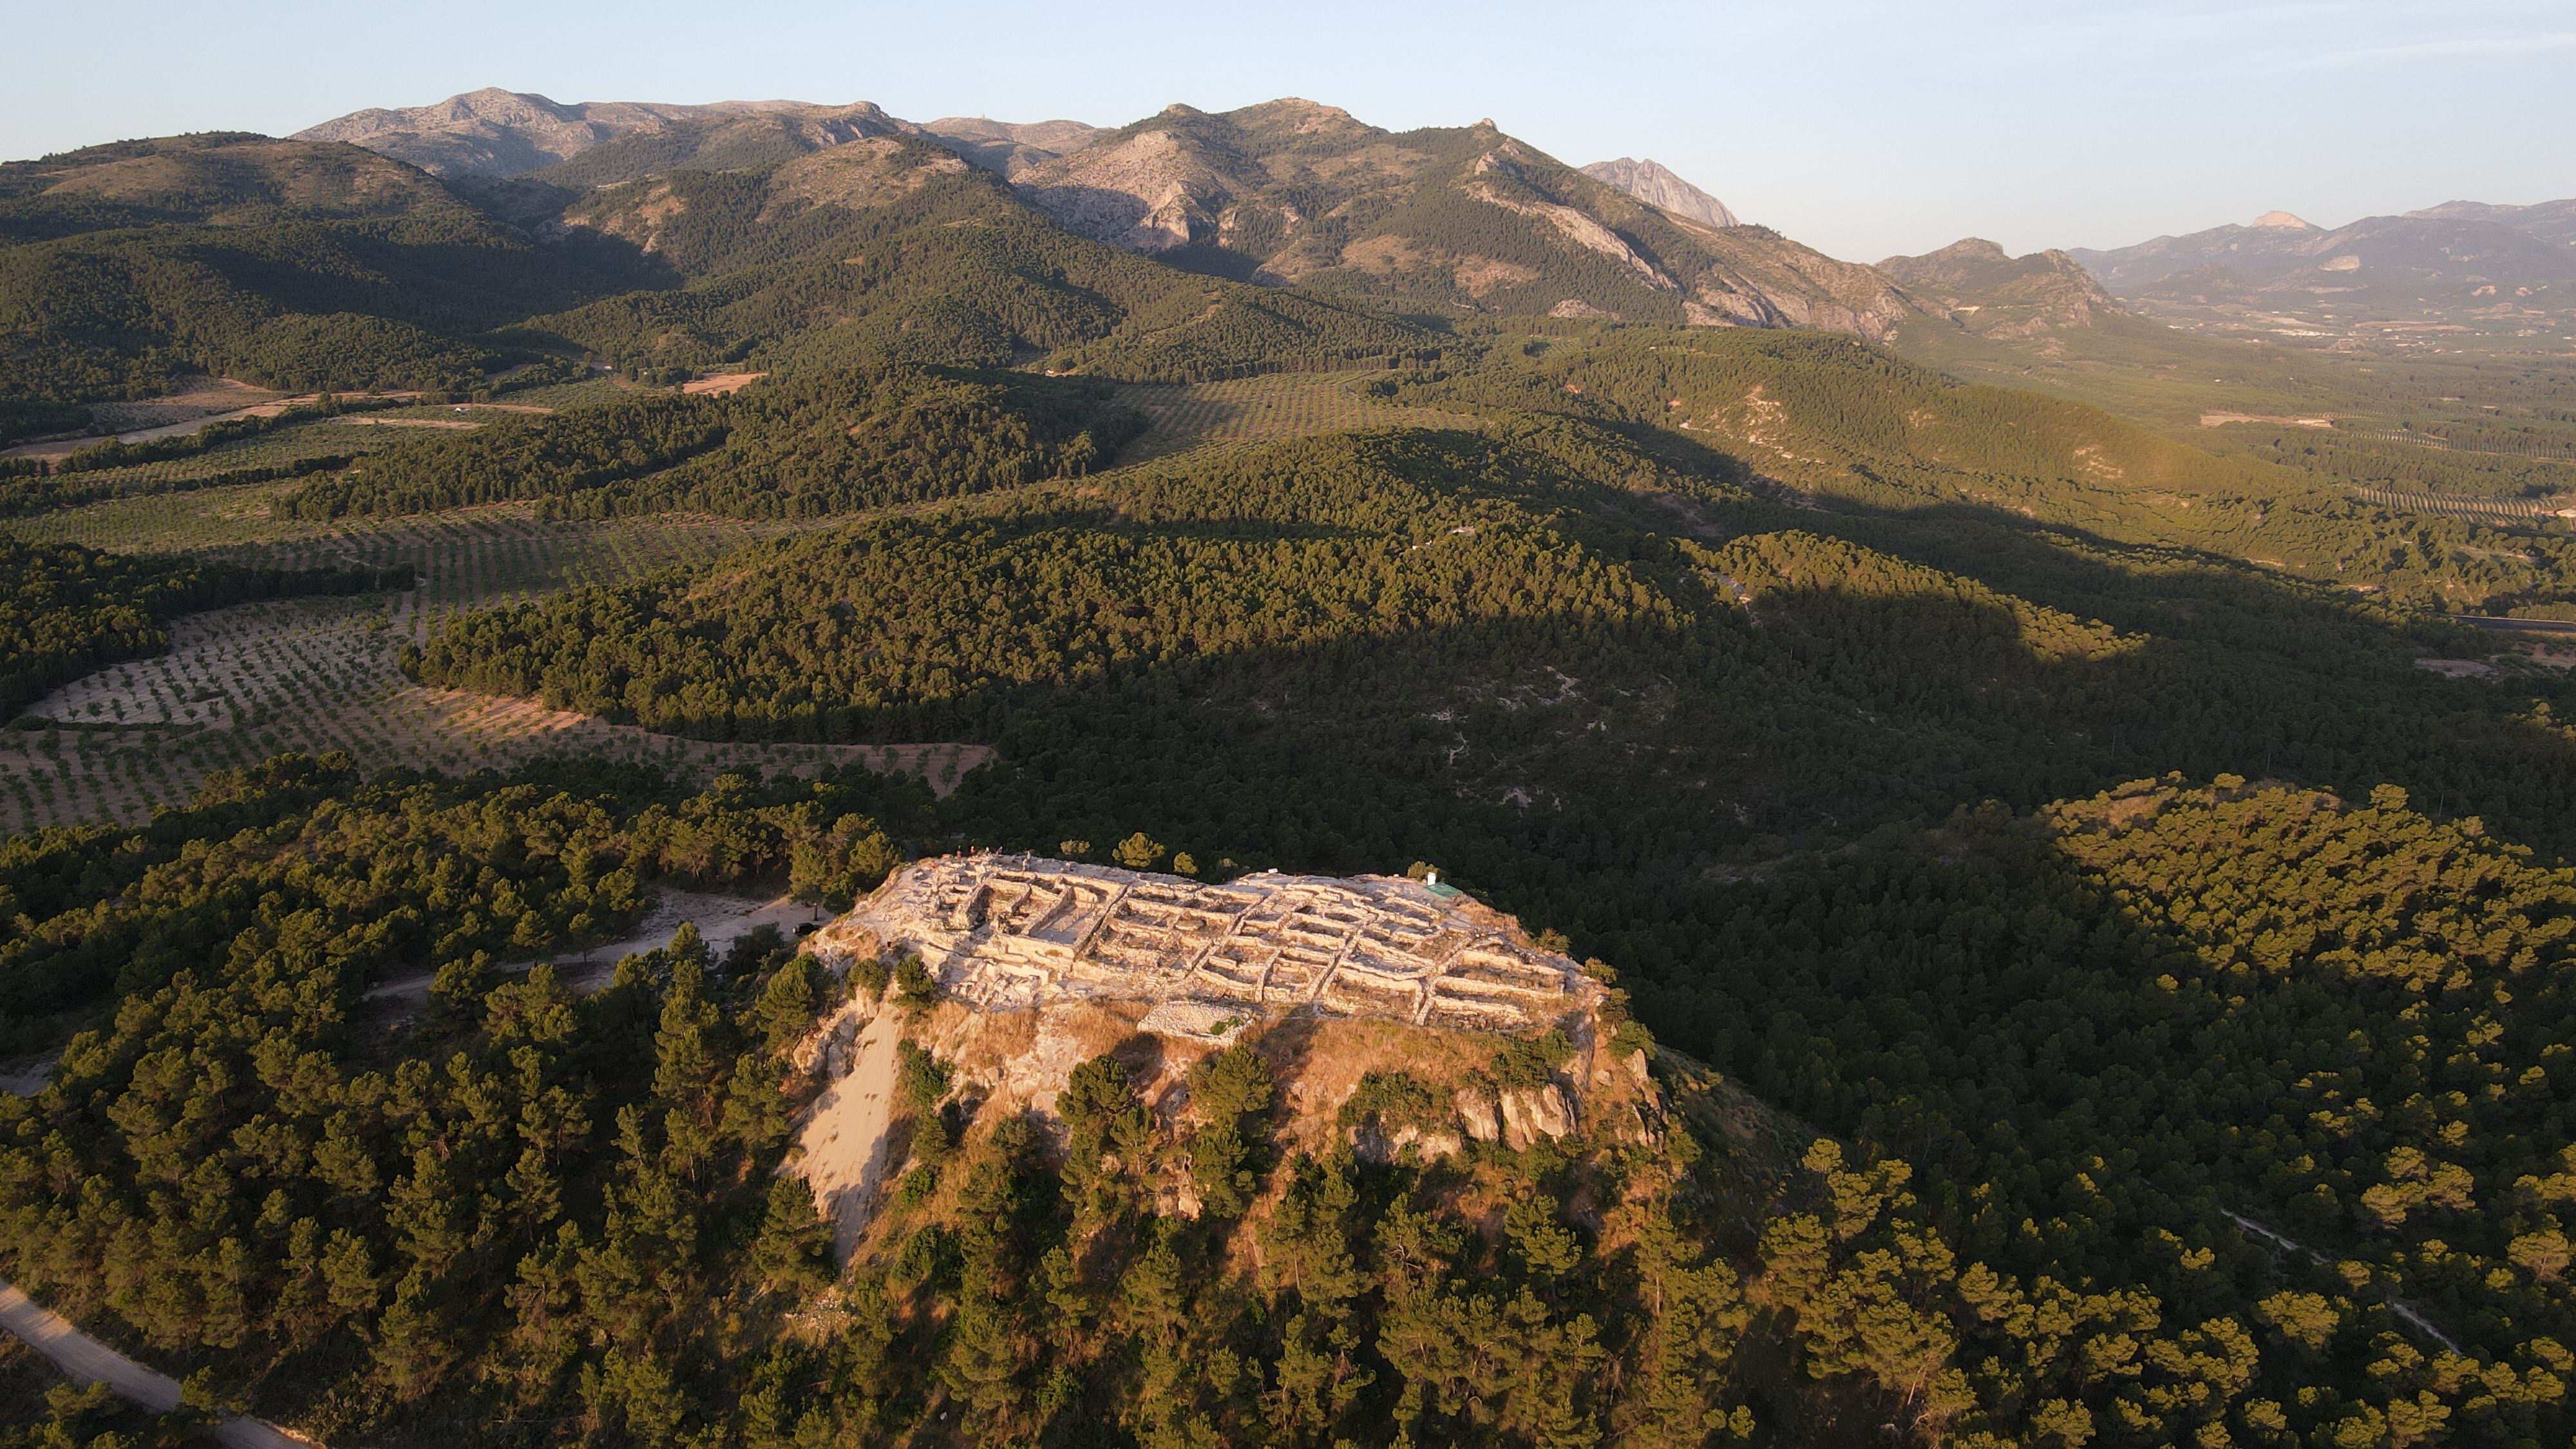 Aerial view of the Argaric settlement of La Almoloya (Murcia).